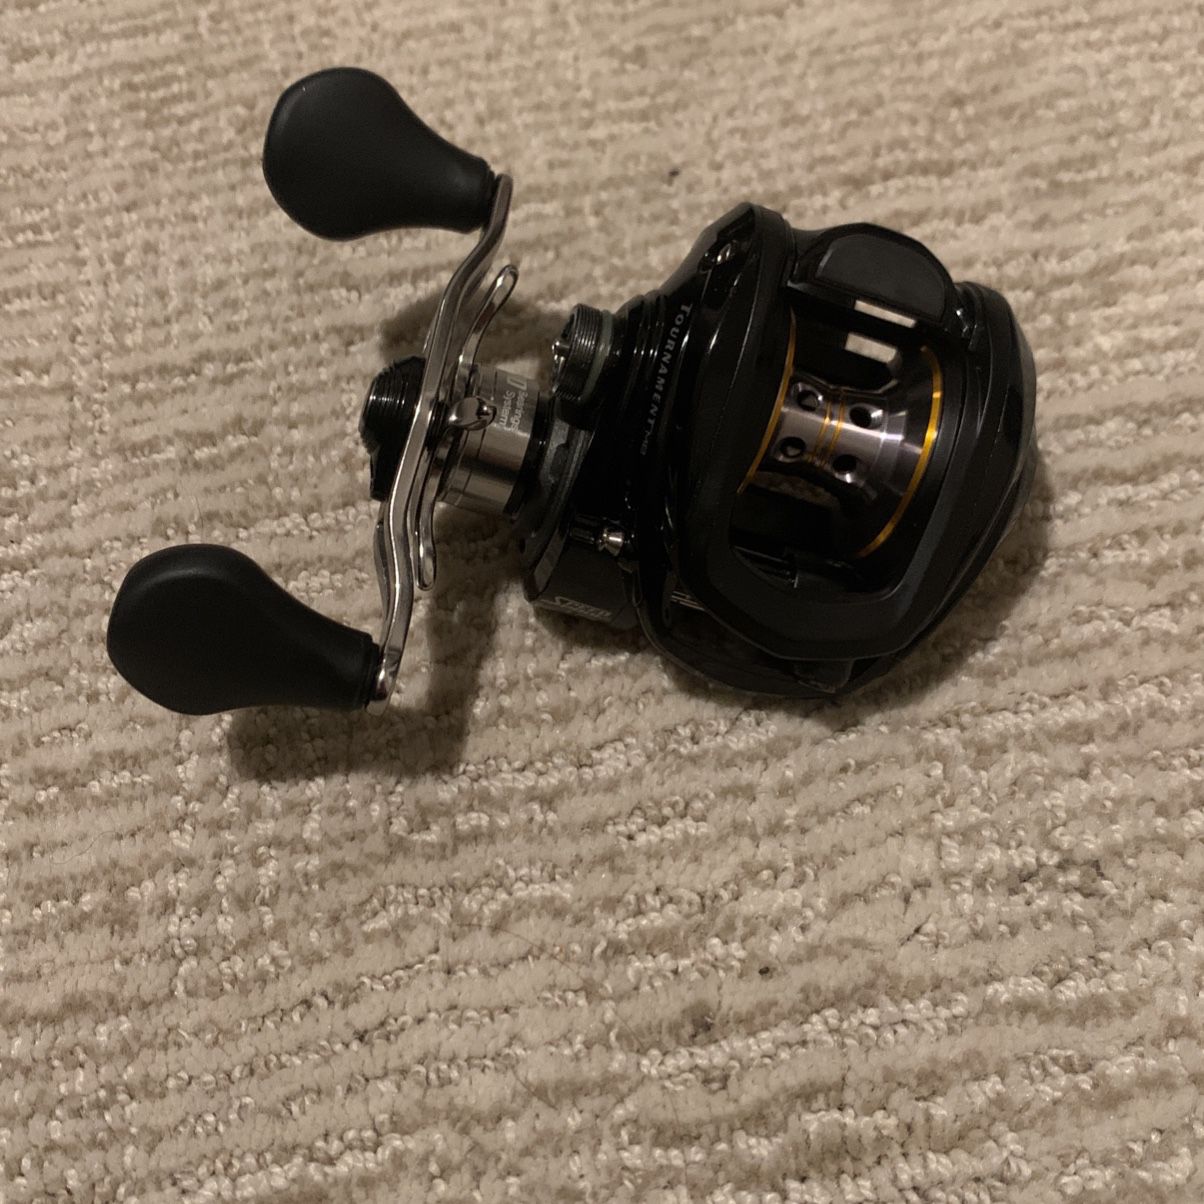 Lew's fishing Tournament MB bait cast Reel (selling for Parts) for